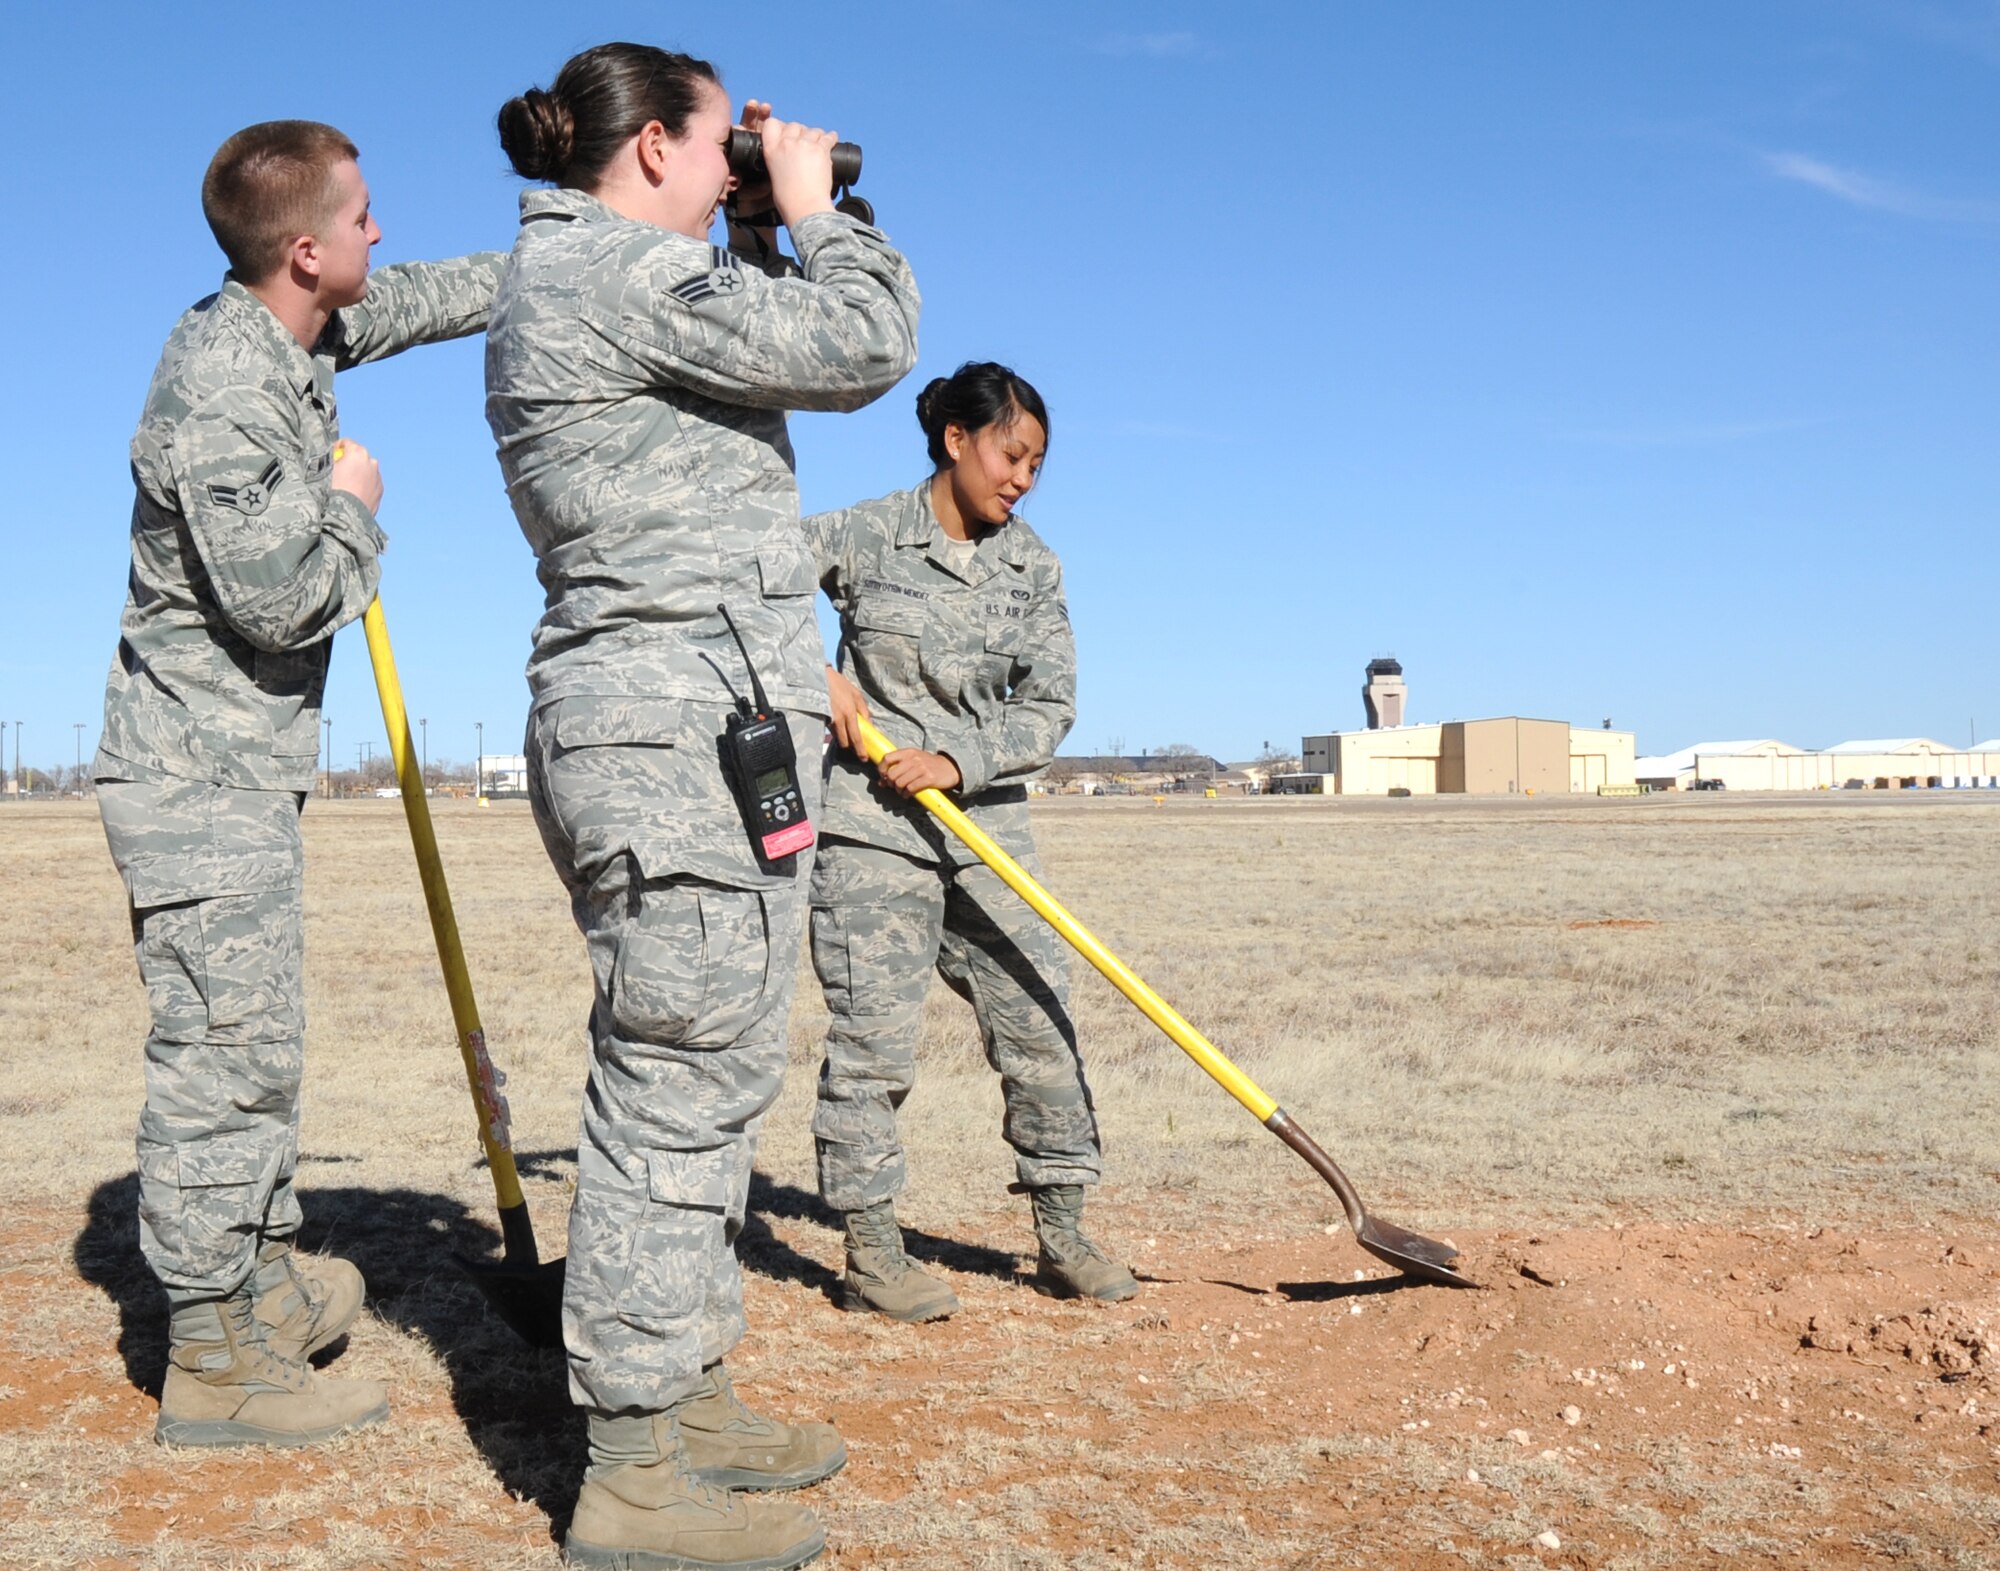 U.S. Air Force Senior Airman C?Belle Tennimon and Airman 1st Class Jacob Mathis survey the area for prairie dogs while Airman 1st Class Lisa Sottiyothin-Mendez levels upturned land near the flightline at Cannon Air Force Base, N.M., Feb. 1, 2012. All three Air Commandos are pest managers who routinely deal with public health concerns at Cannon. (U.S. Air Force photo by Airman 1st Class Alexxis Pons Abascal)  